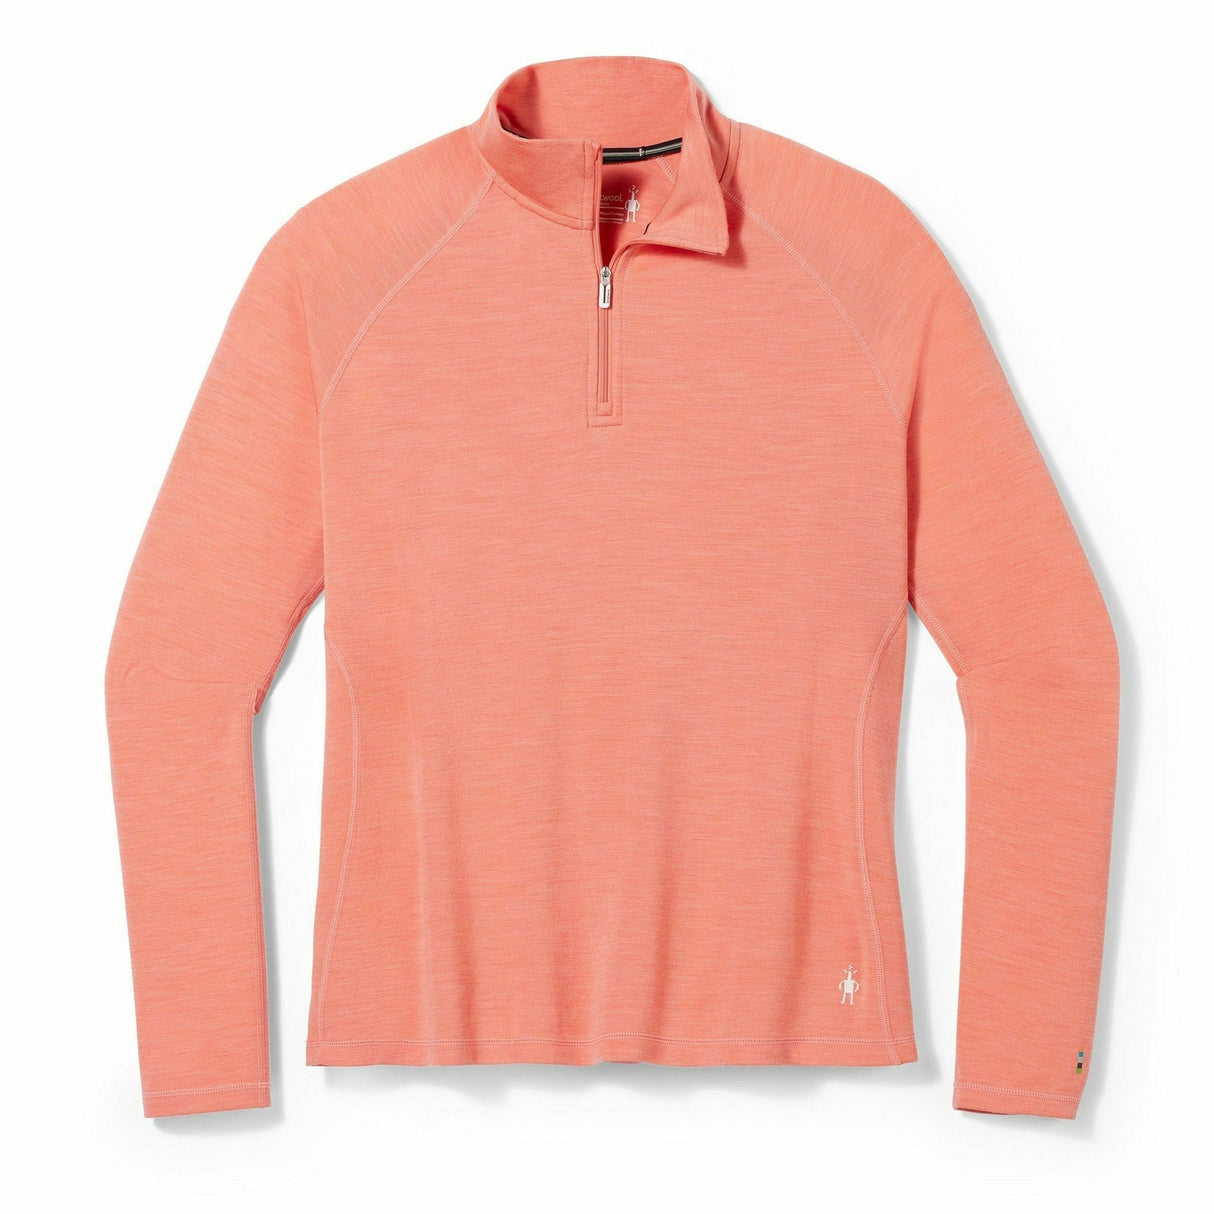 Smartwool Womens Classic Thermal Merino Base Layer 1/4 Zip Plus  -  1X / Sunset Coral Heather